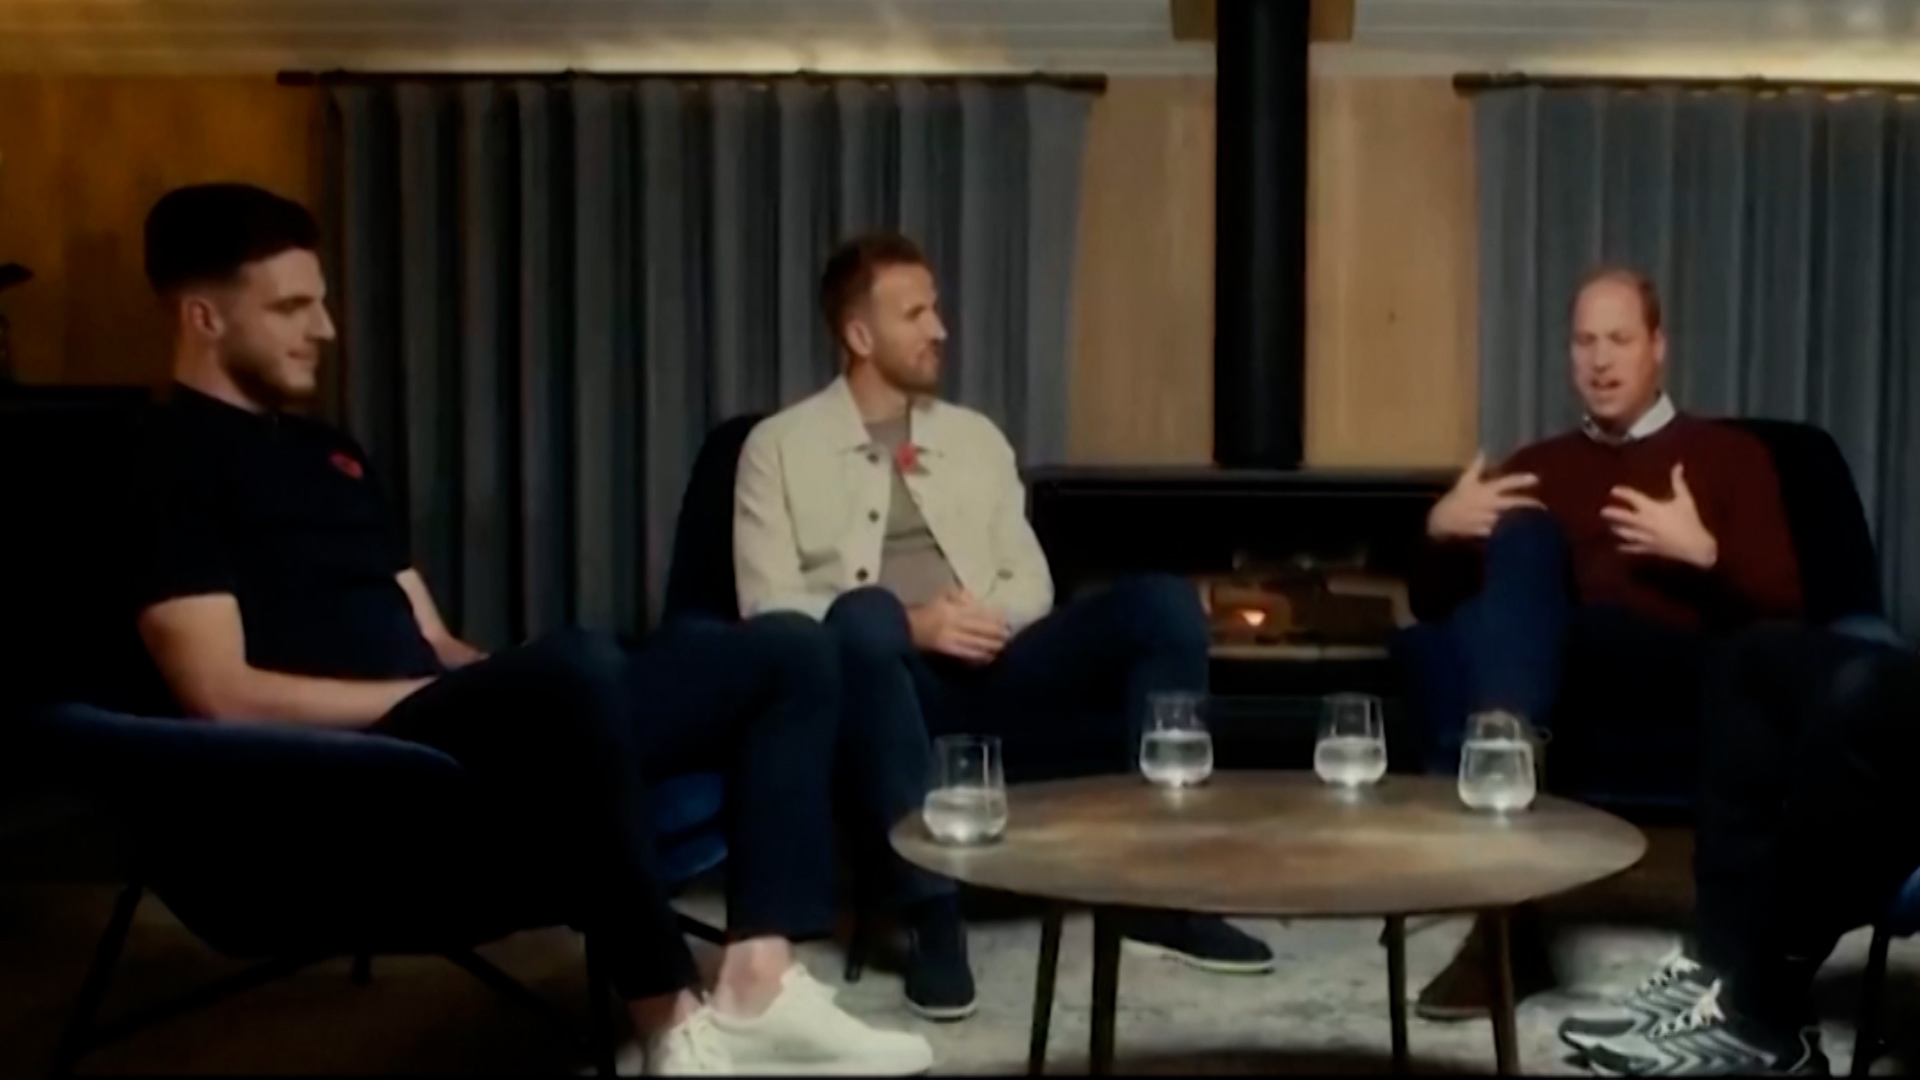 Prince William and Harry Kane discuss the mental struggles of football